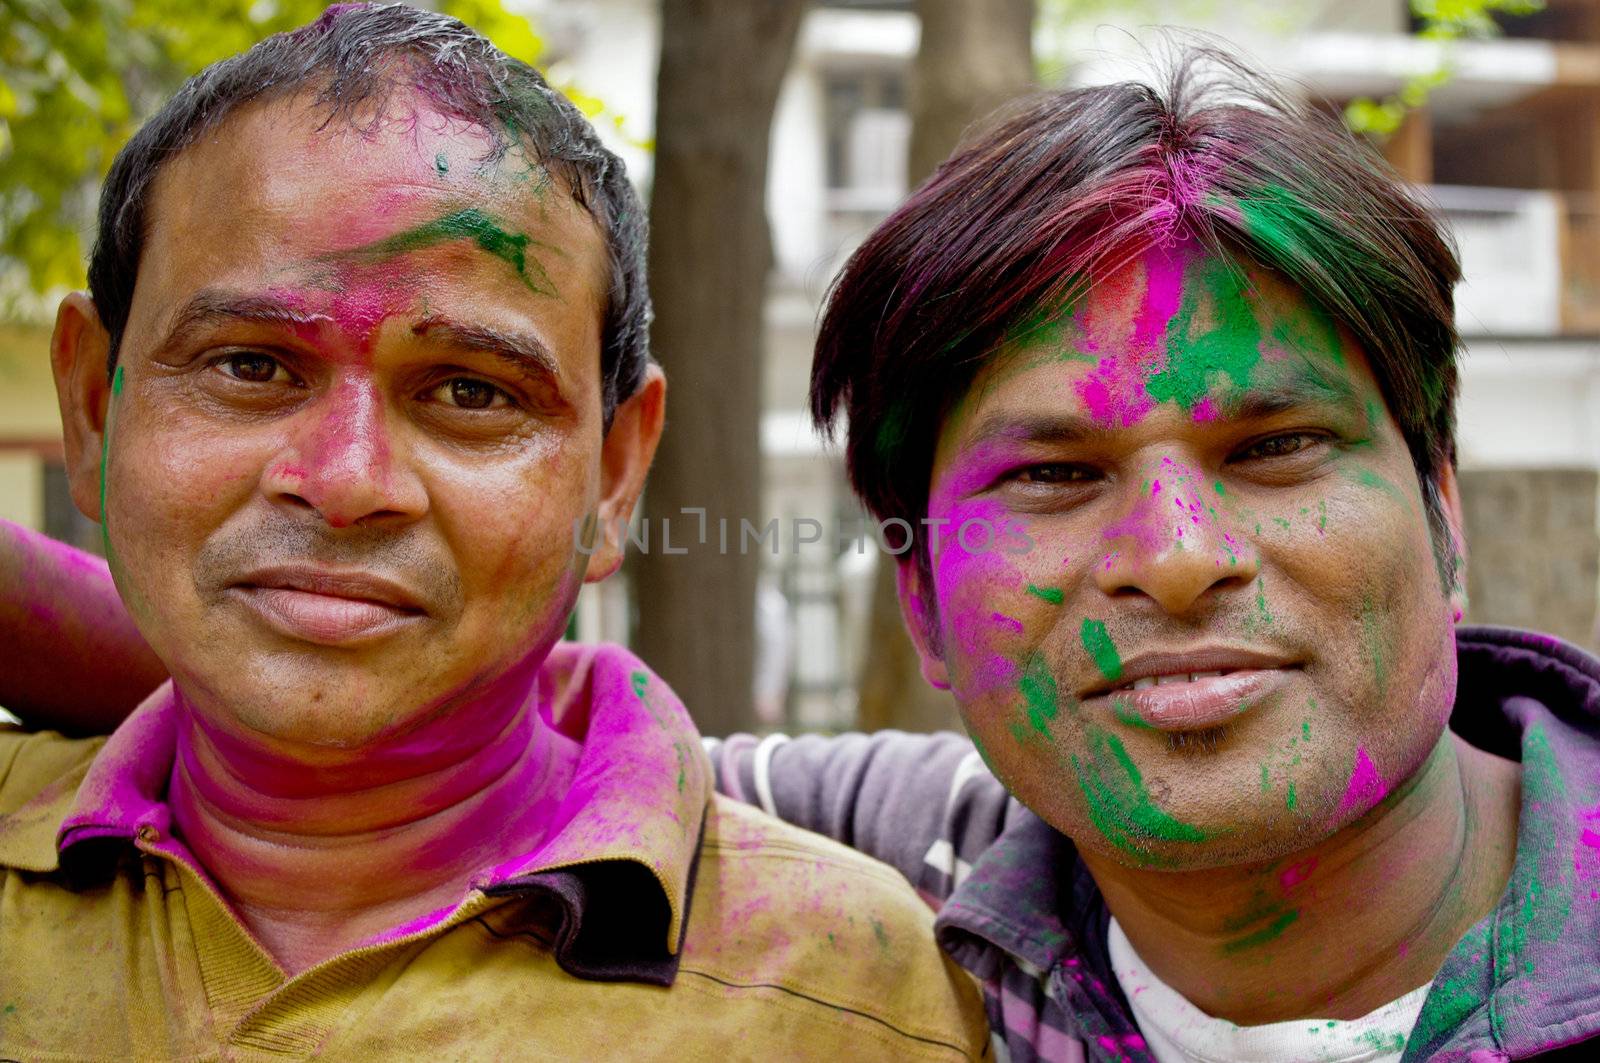 Indian men with painted faces by Komar